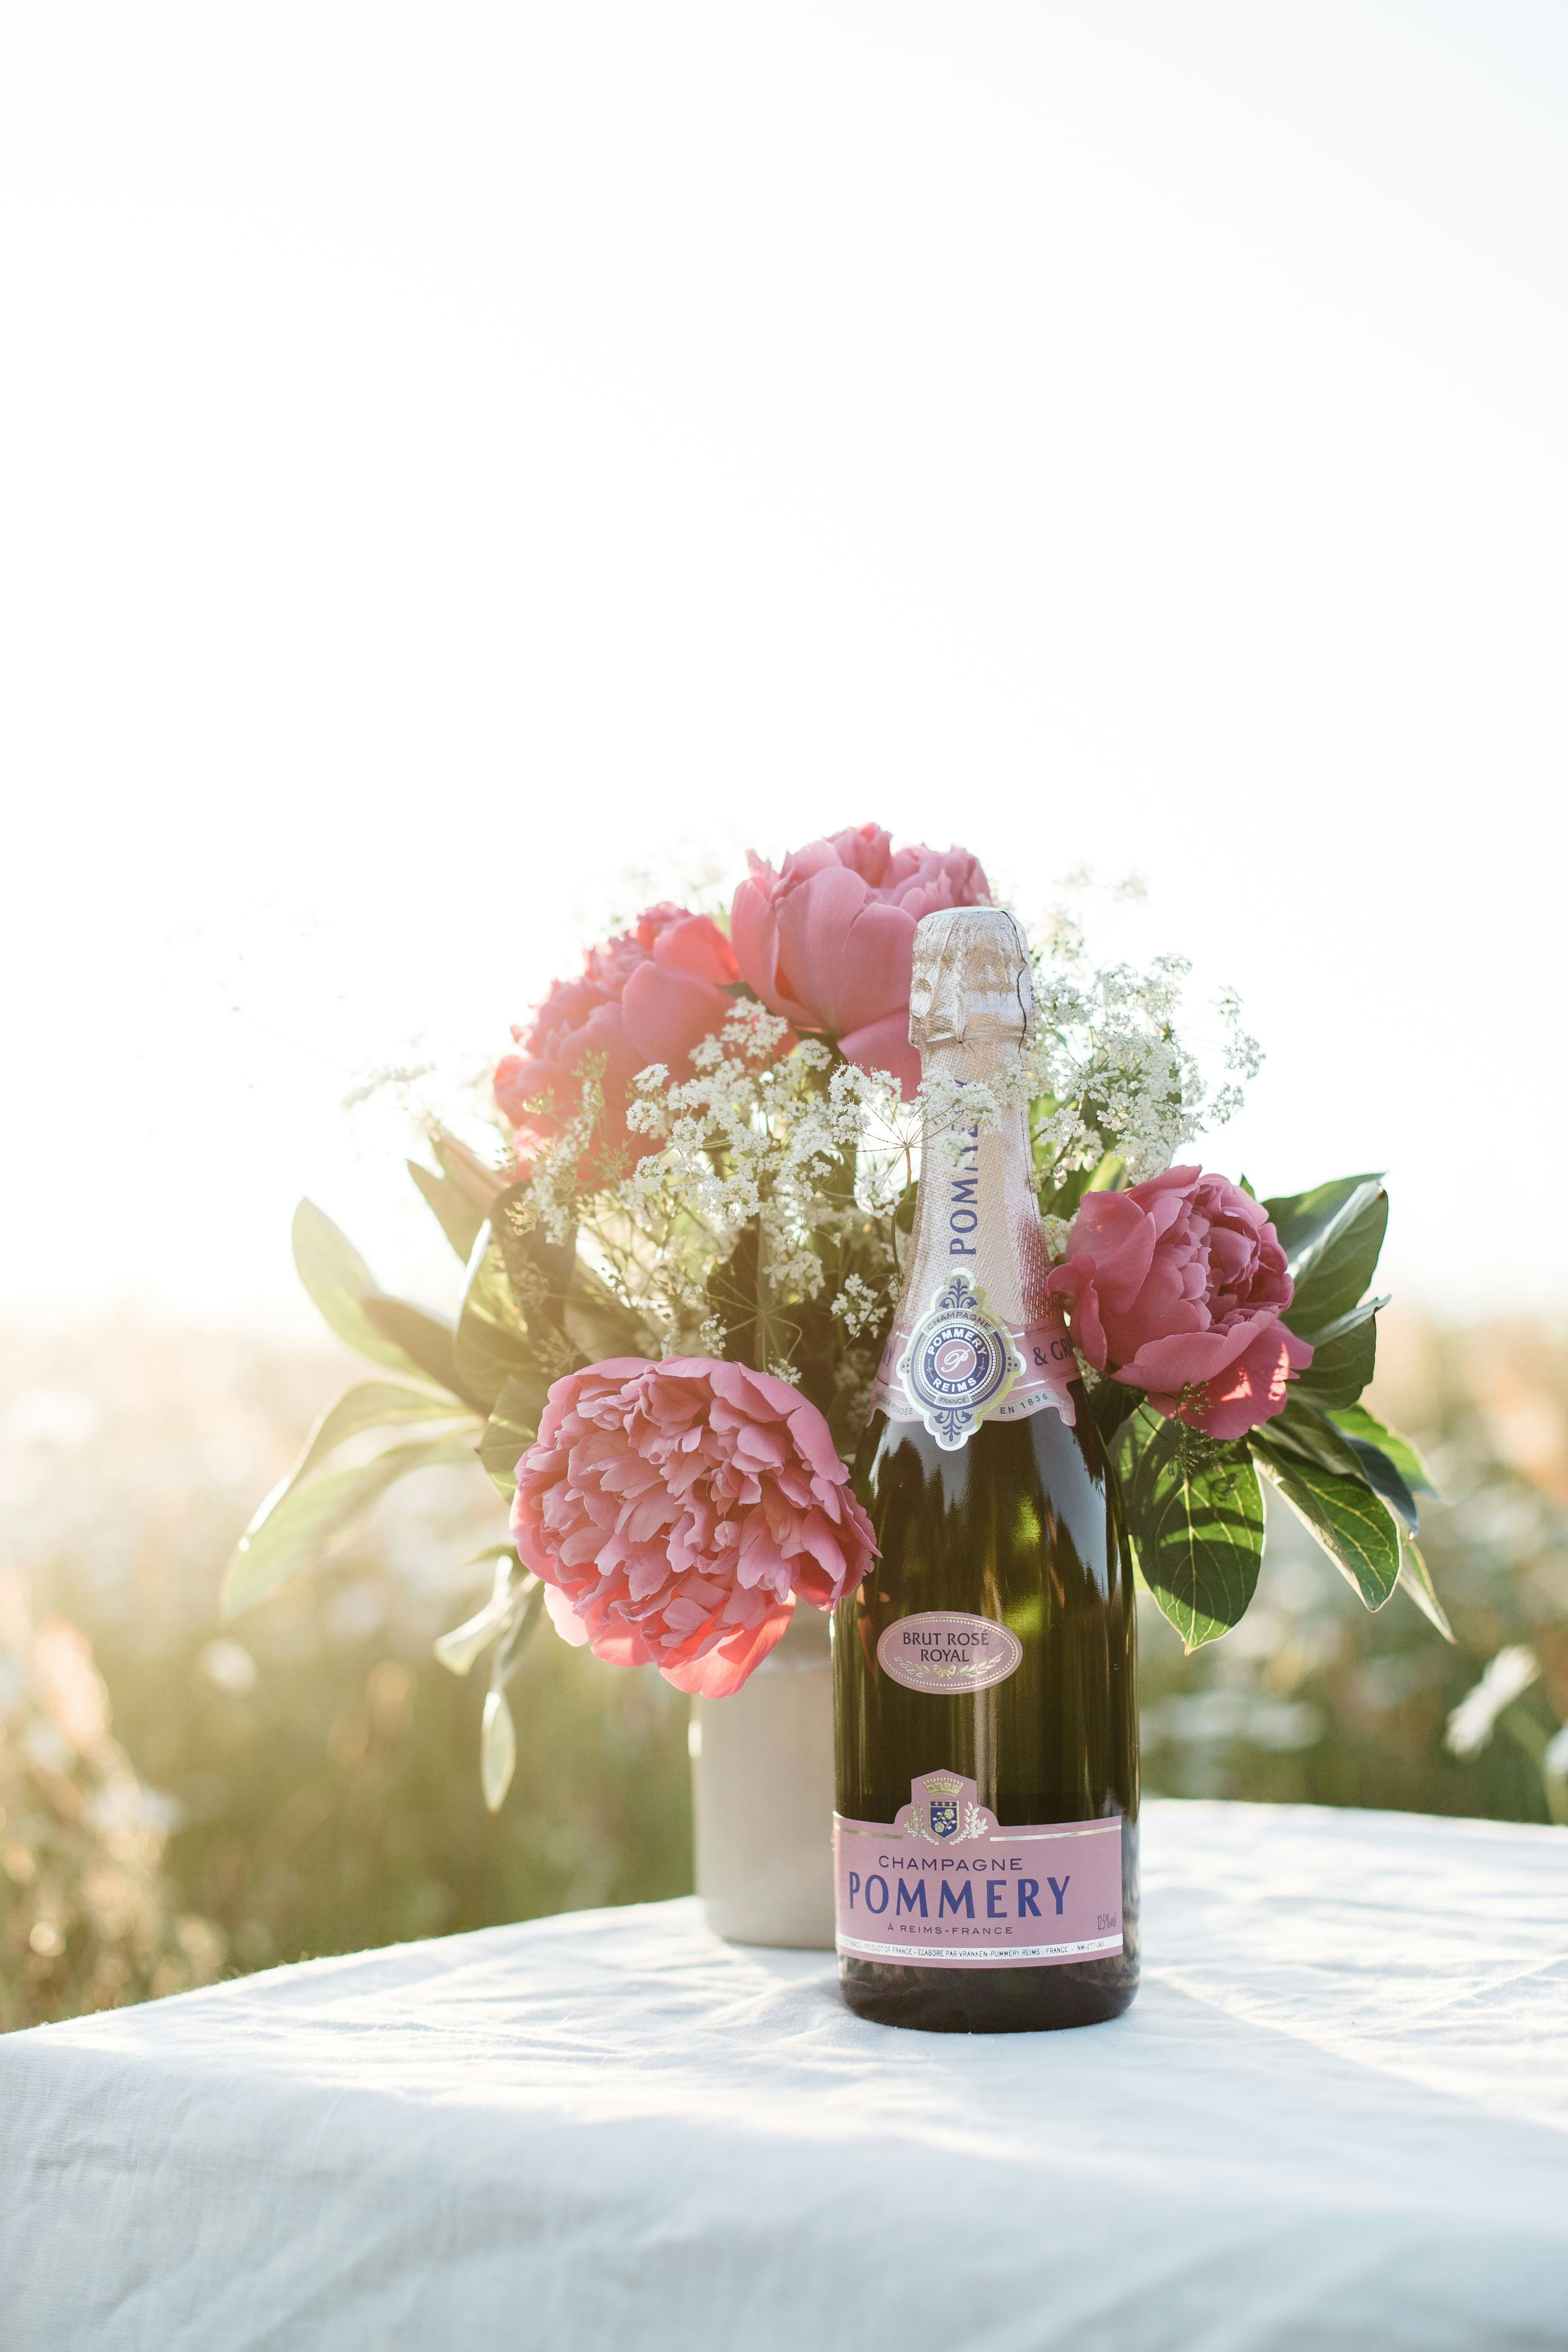 Bottle of Pommery Brut Rosé Royal 75cl with flowers